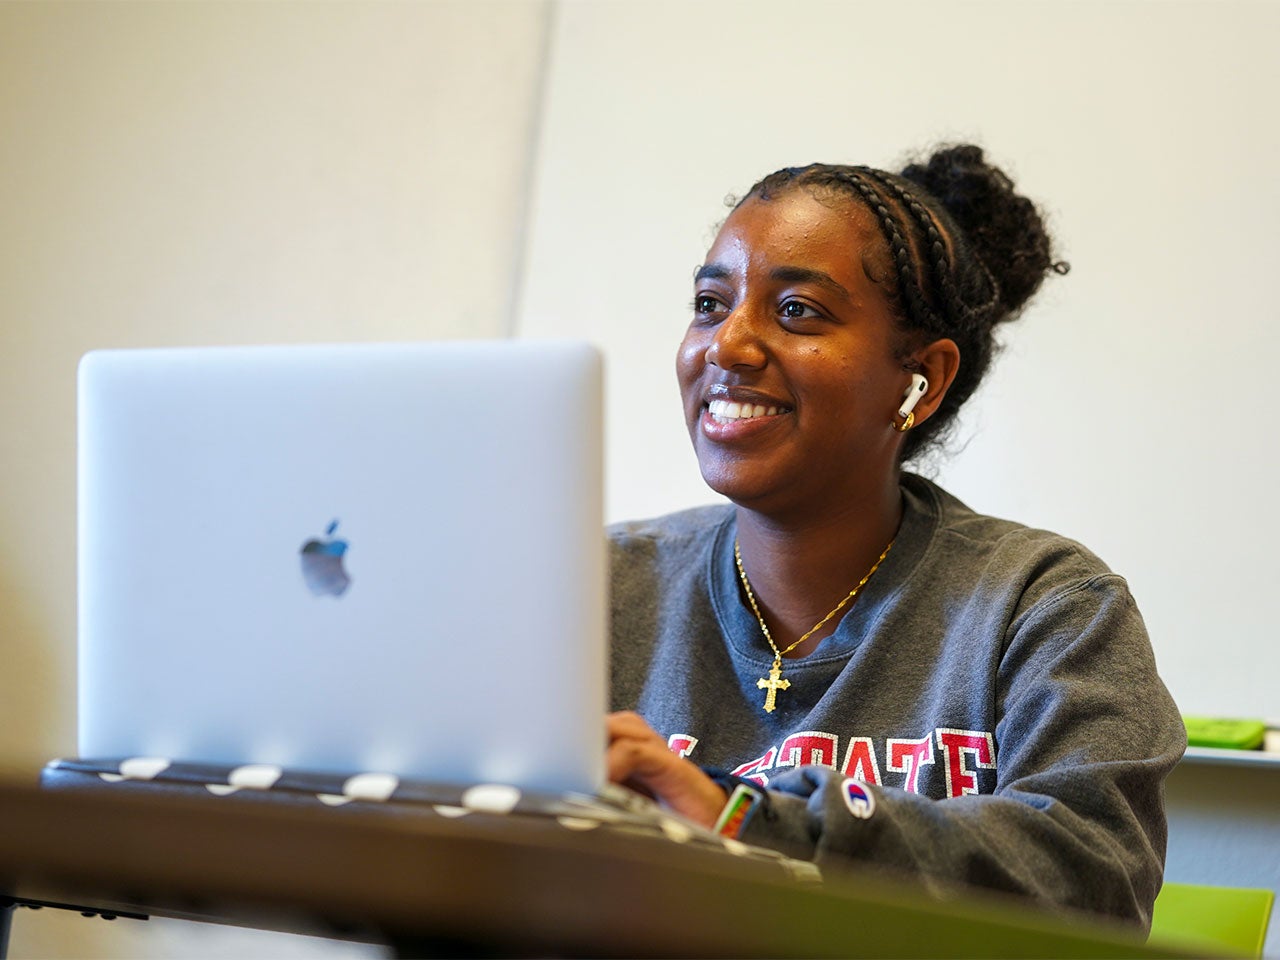 A ˽̳ Davis student smiles while typing on a silver laptop.